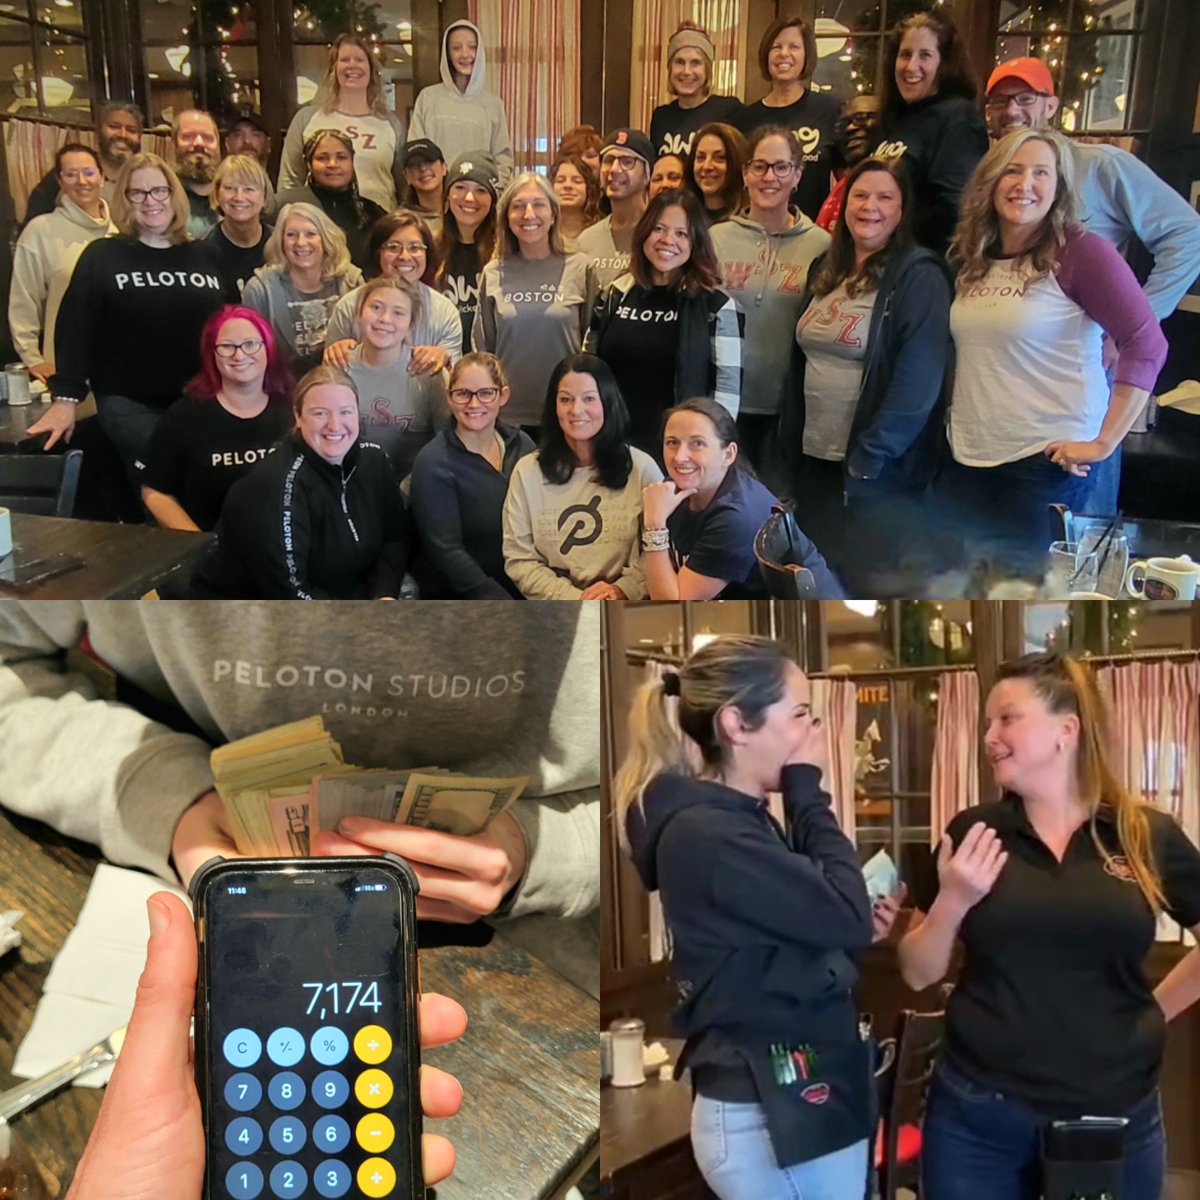 When this community comes together, big tips follow. #TipYourServer in 2024 and #DoWickedGood when you go out to eat #restaurant #Tips #breakfast #payitforward #peloton #WickedSmahtZone #FitnessMotivation #peabody #Massachusetts